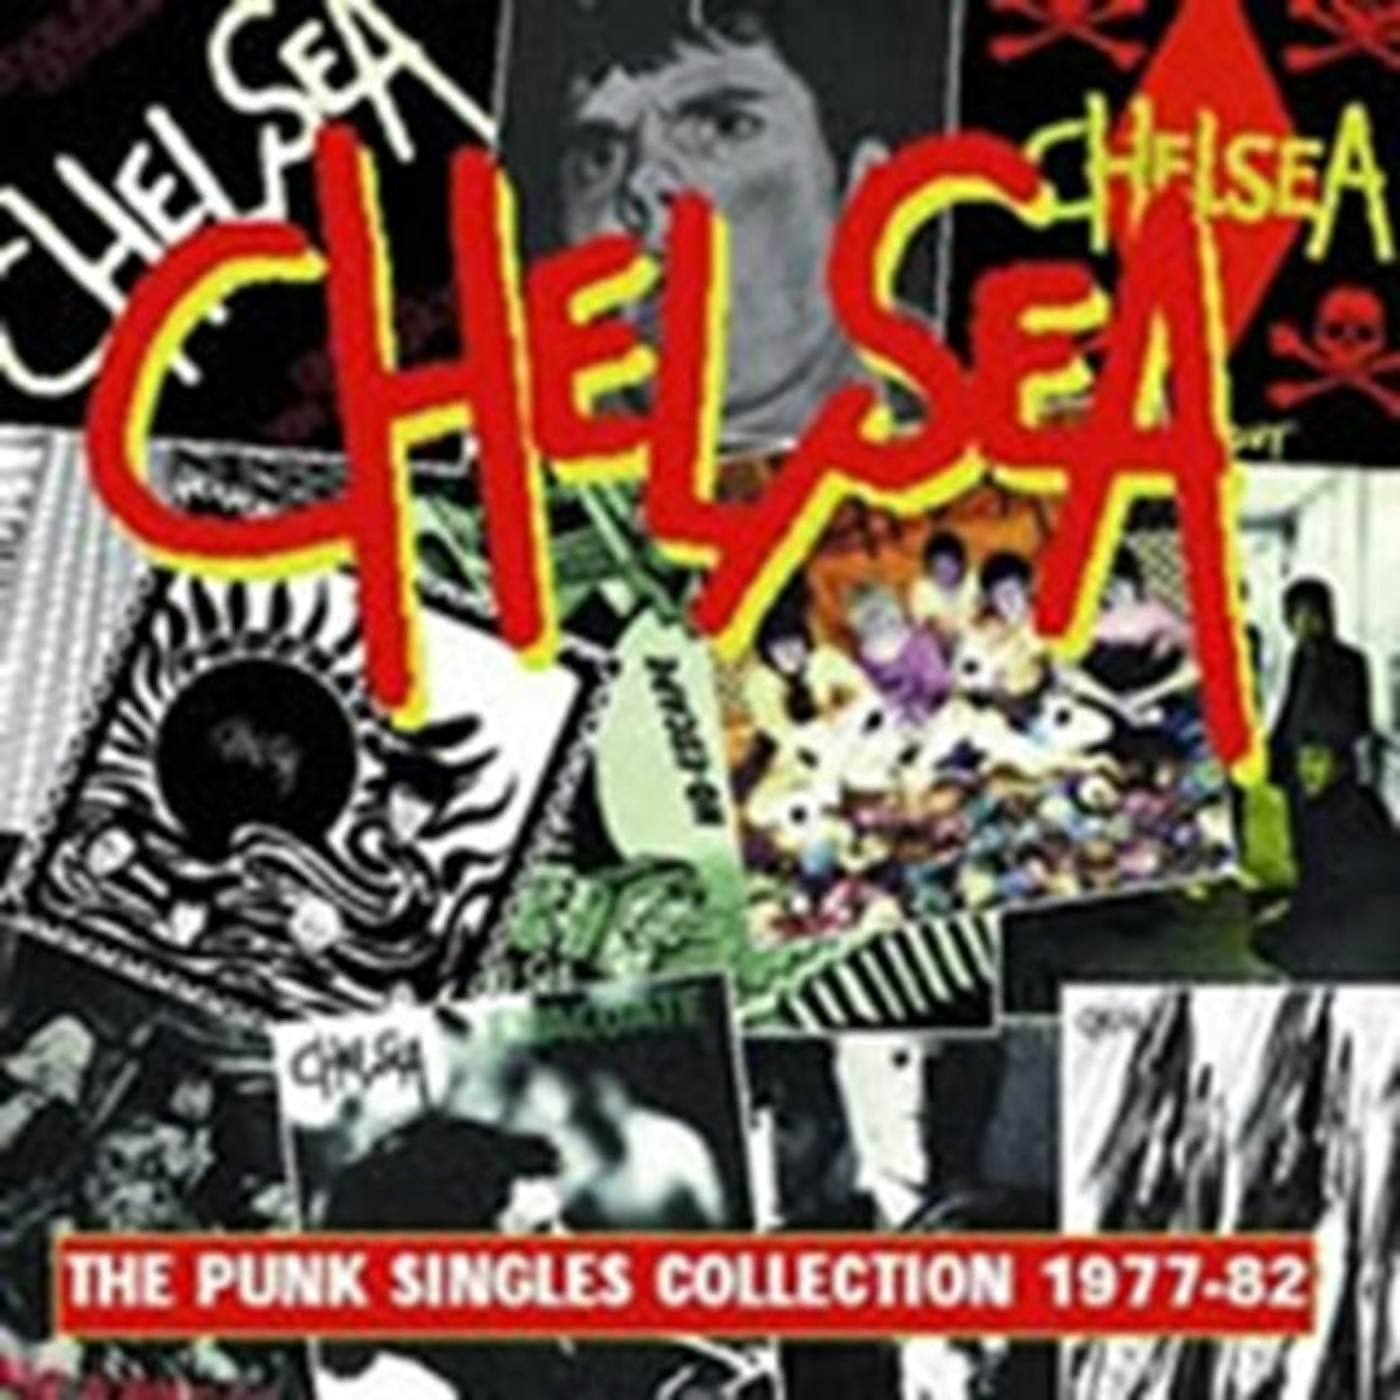 Chelsea CD - Punk Singles Collection 19 77-82